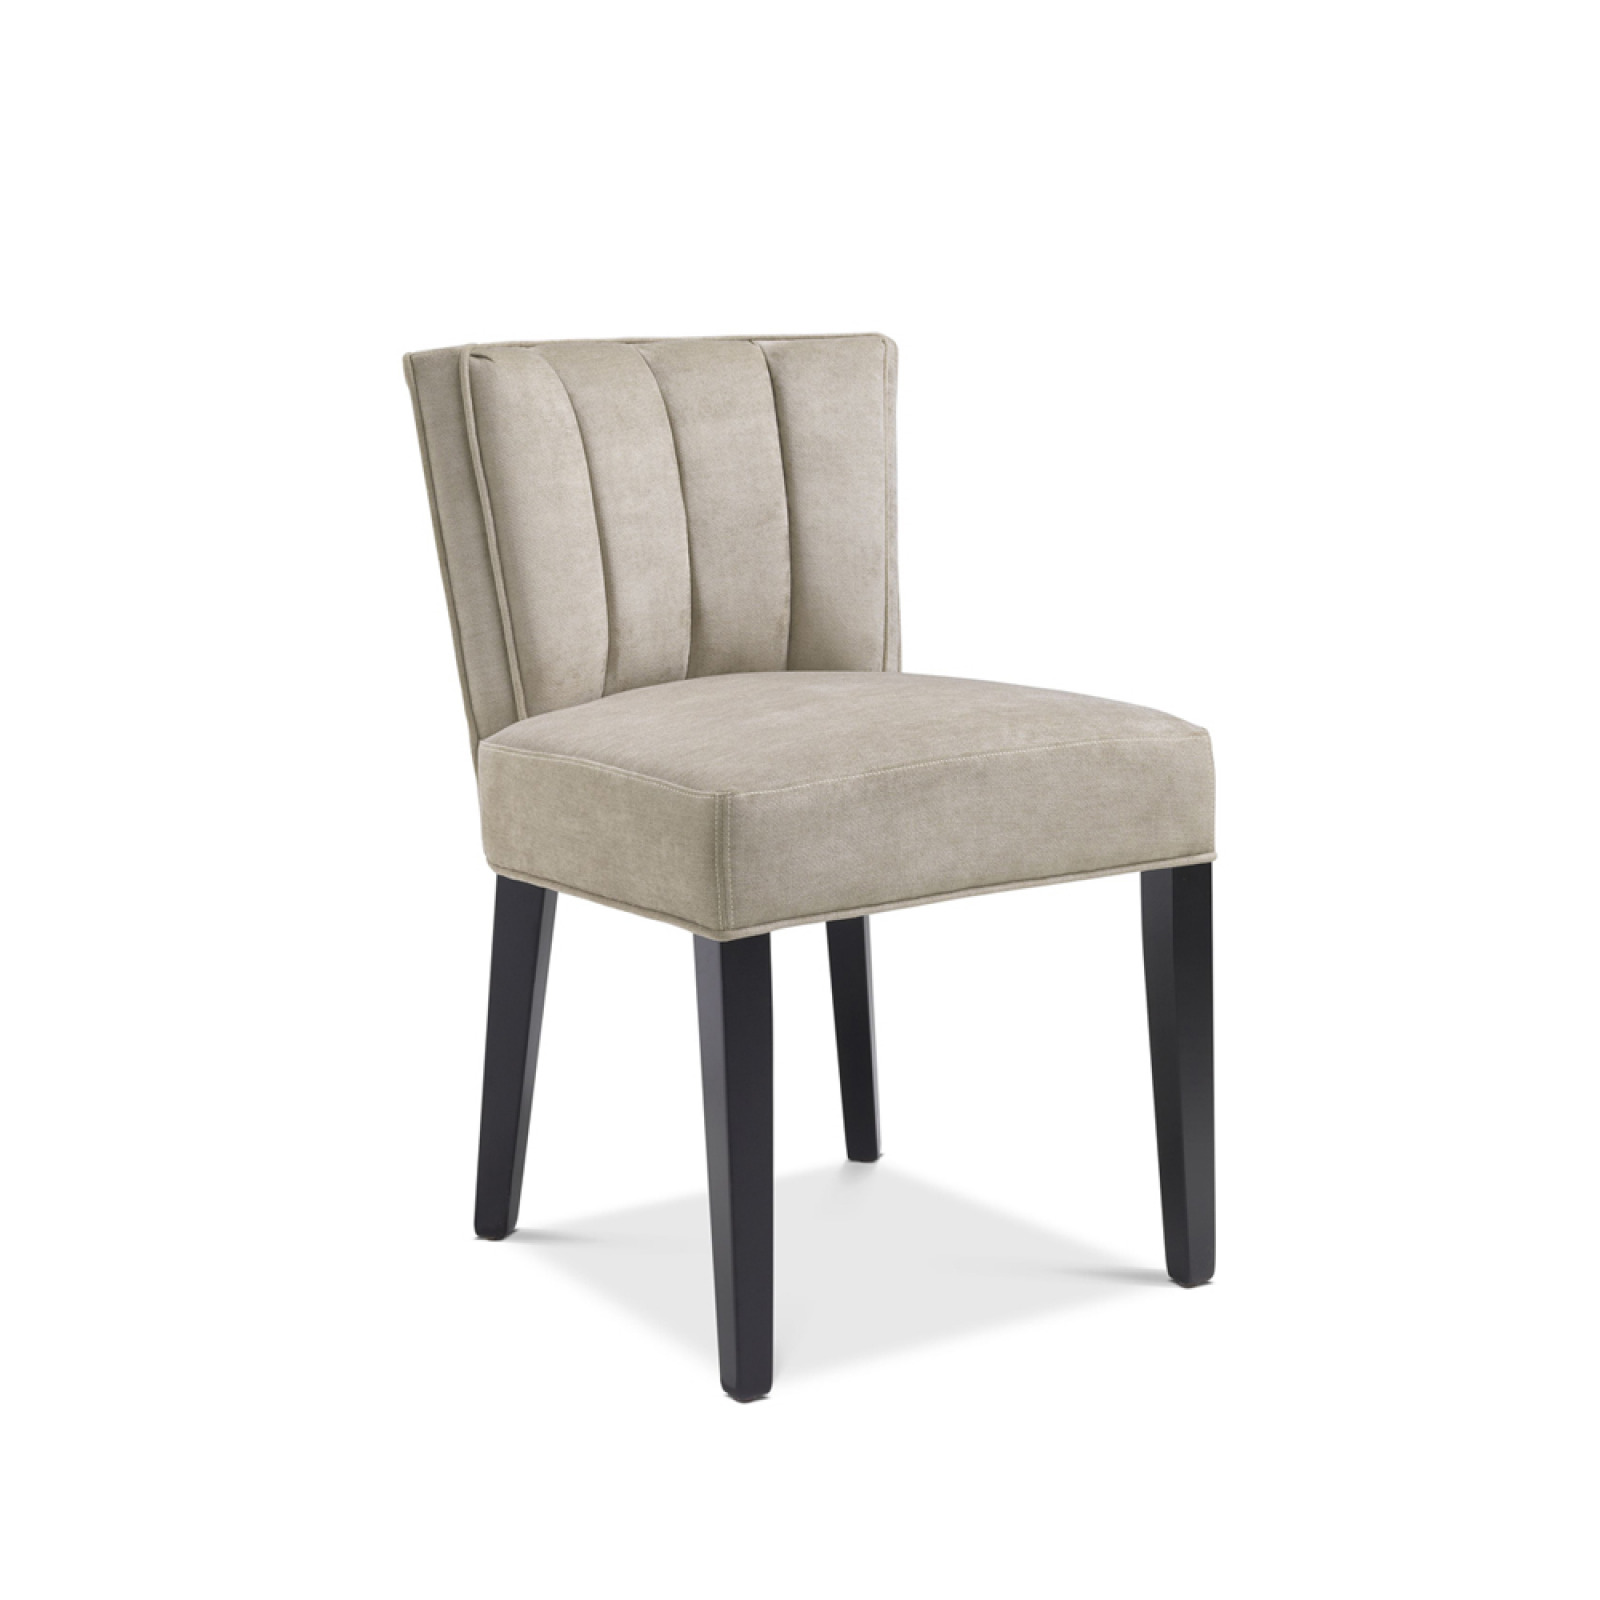 Windhaven Greige chair